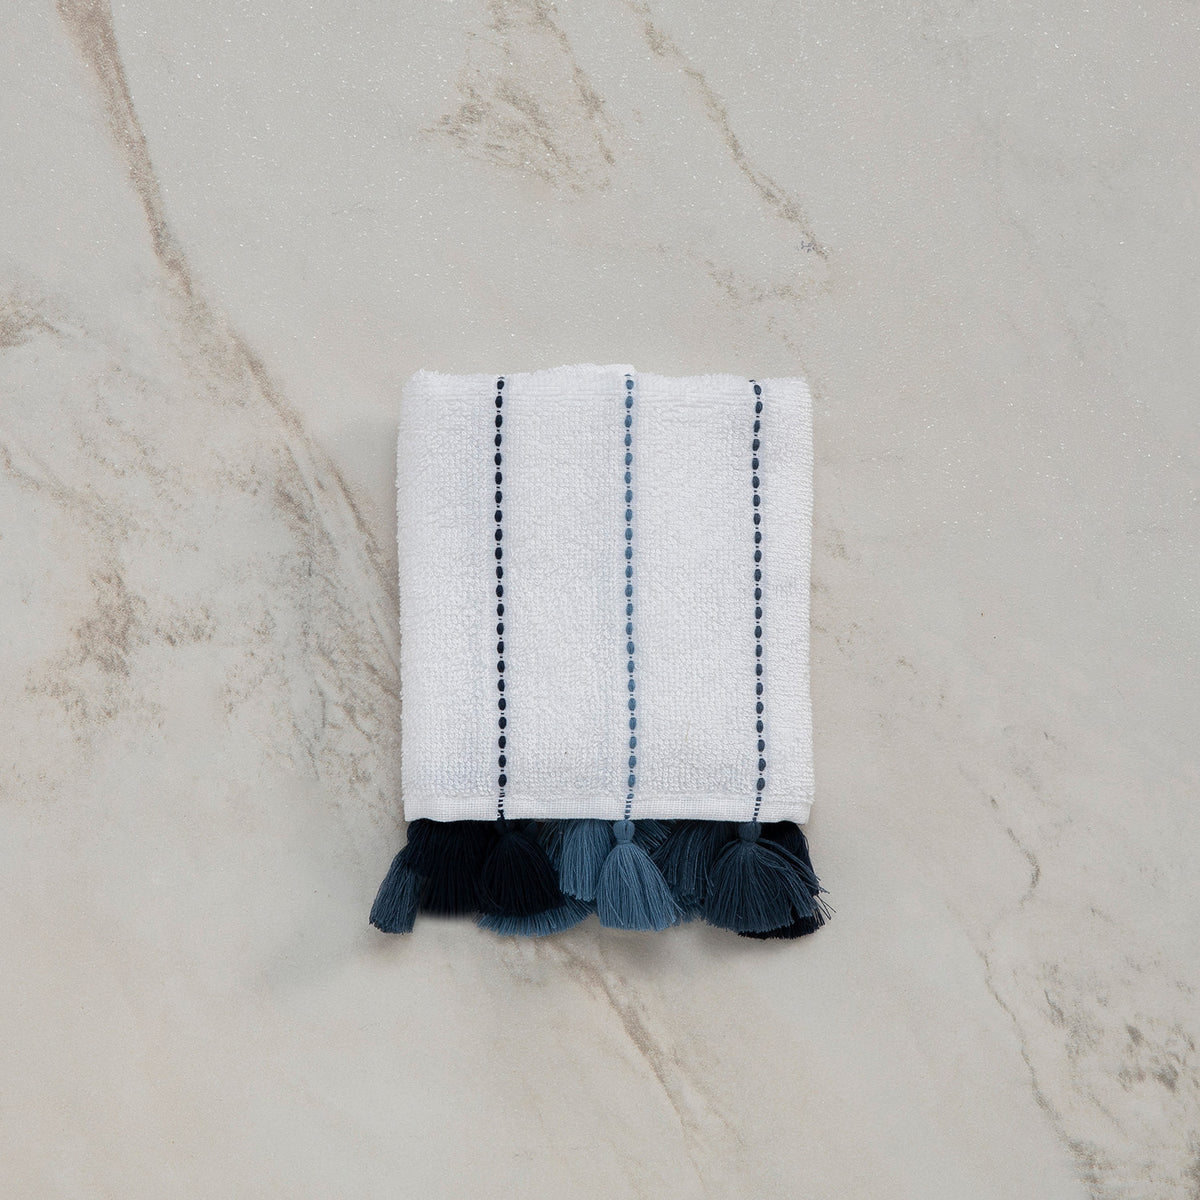 Lina, Terry Towel, Blue Stripes on White, Dark Blue Tassels, ultra soft, very absorbent 